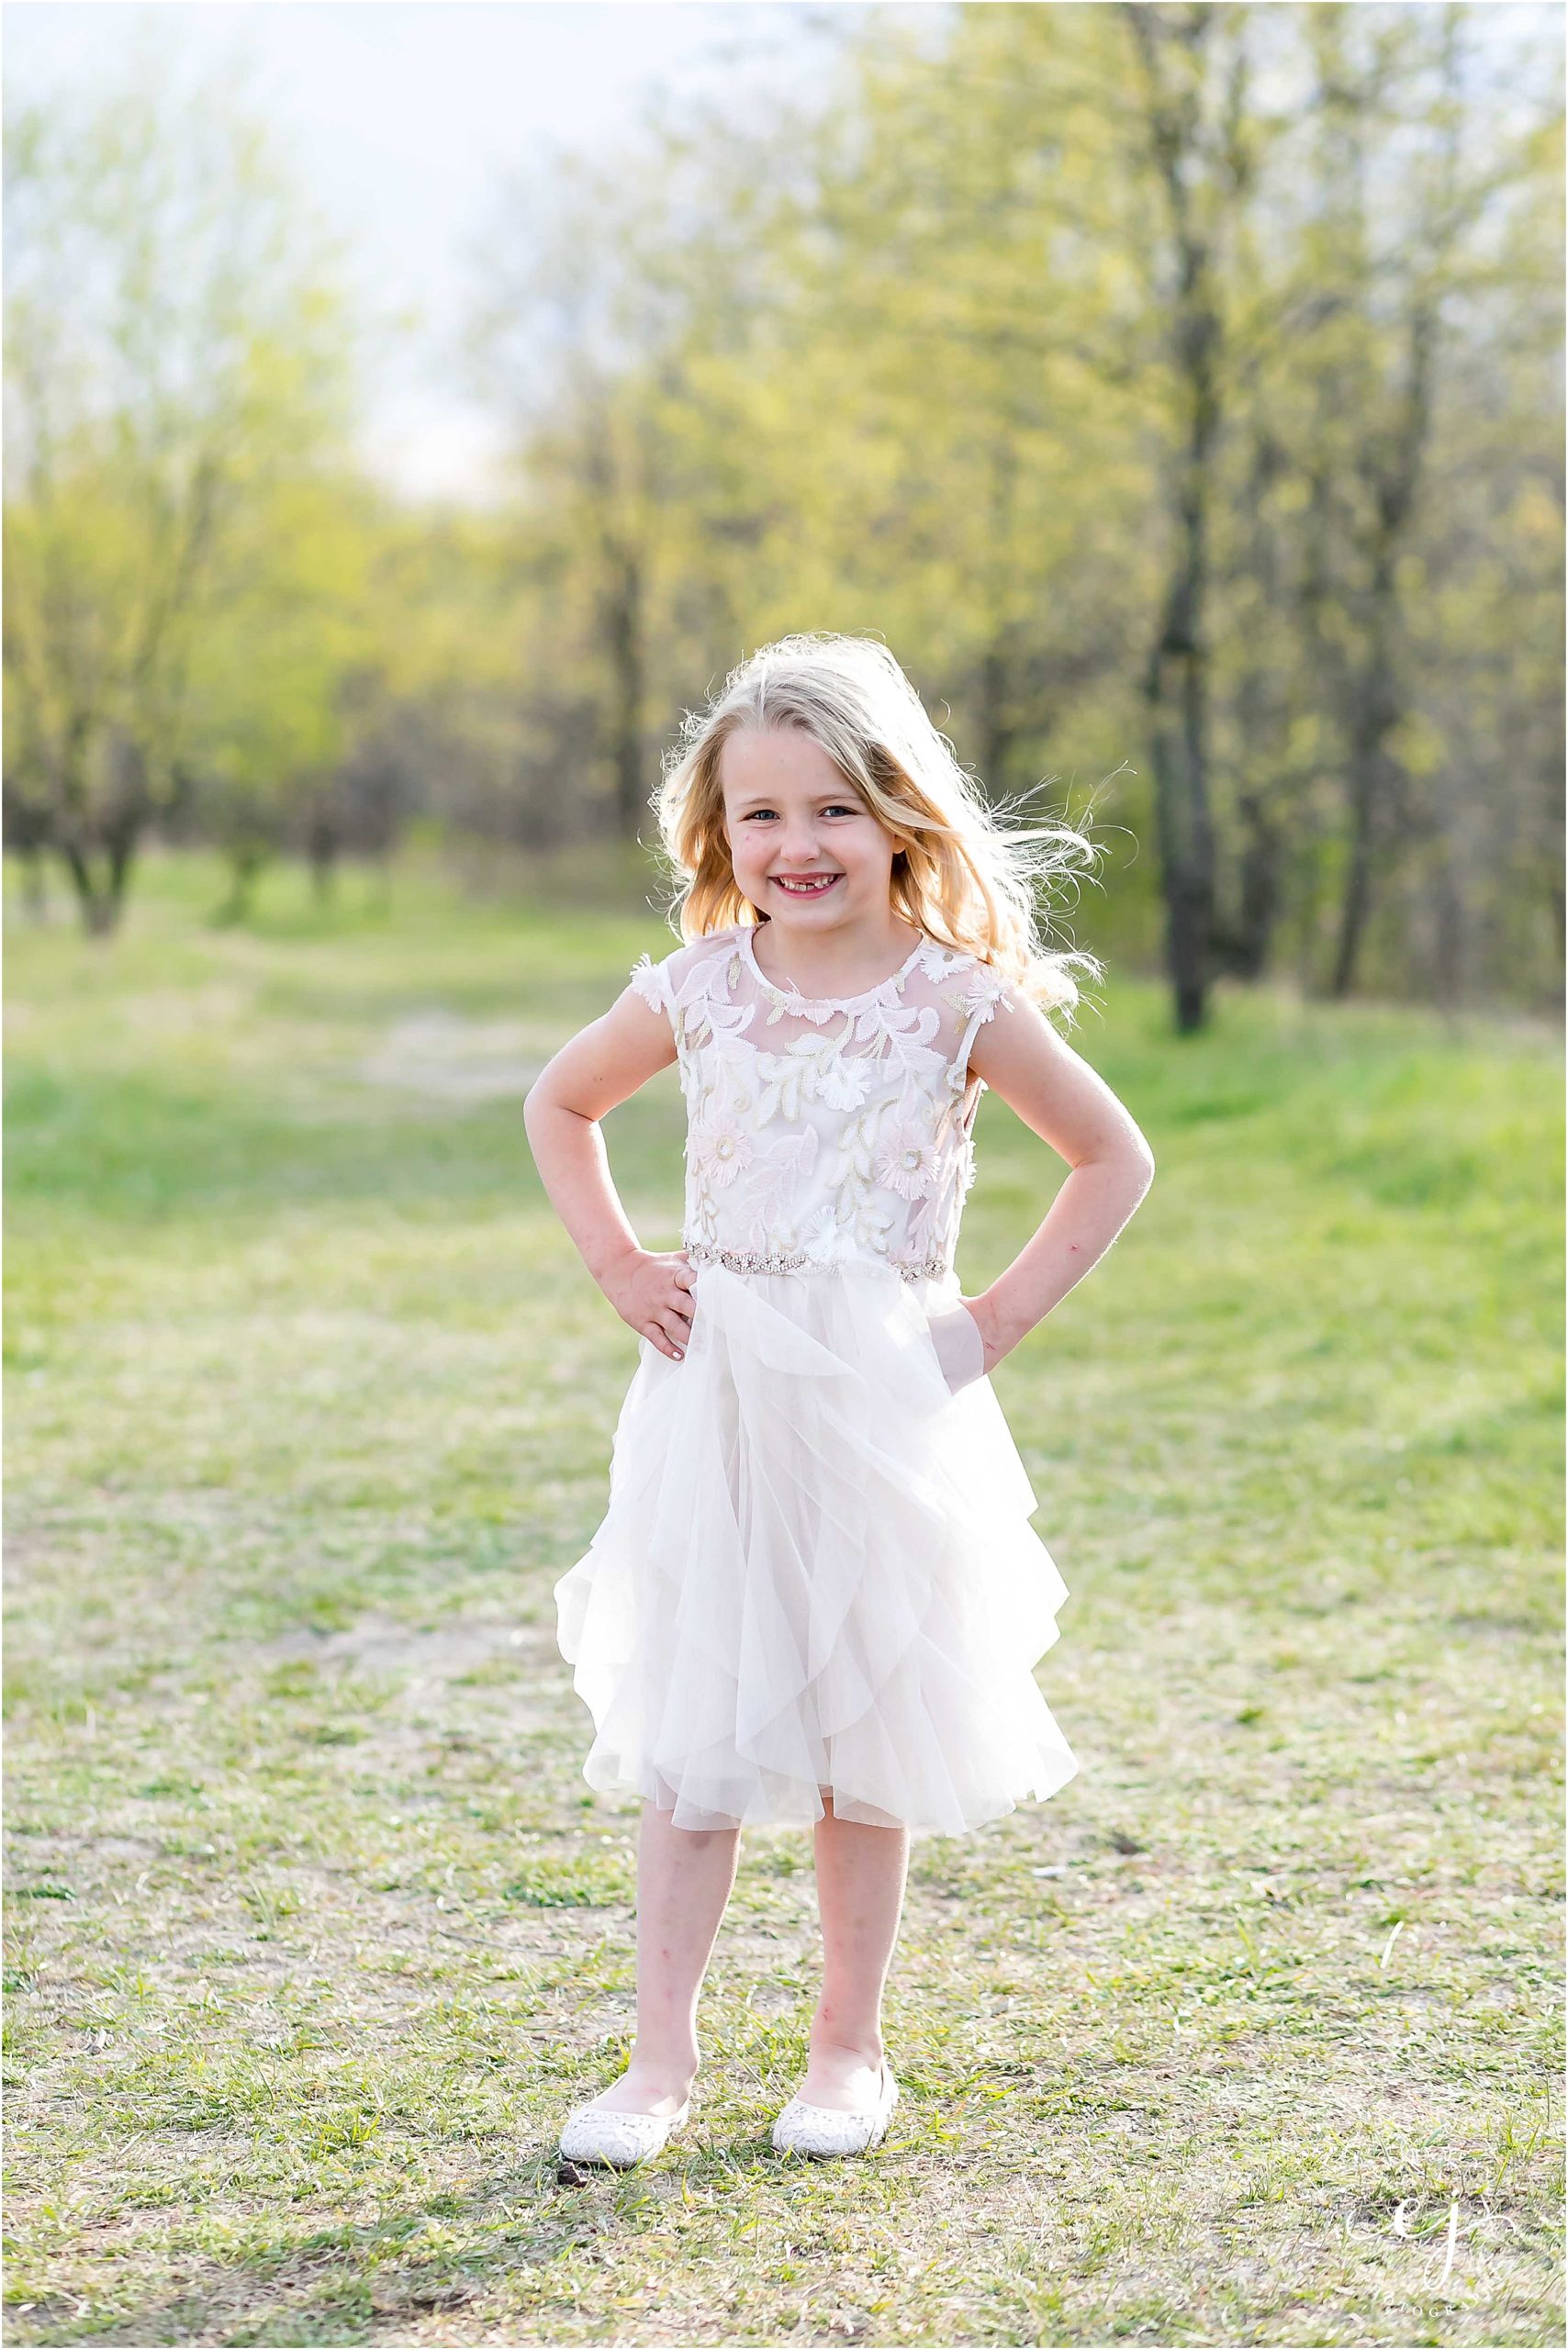 Six year old professional photos wearing beautiful dress at a park